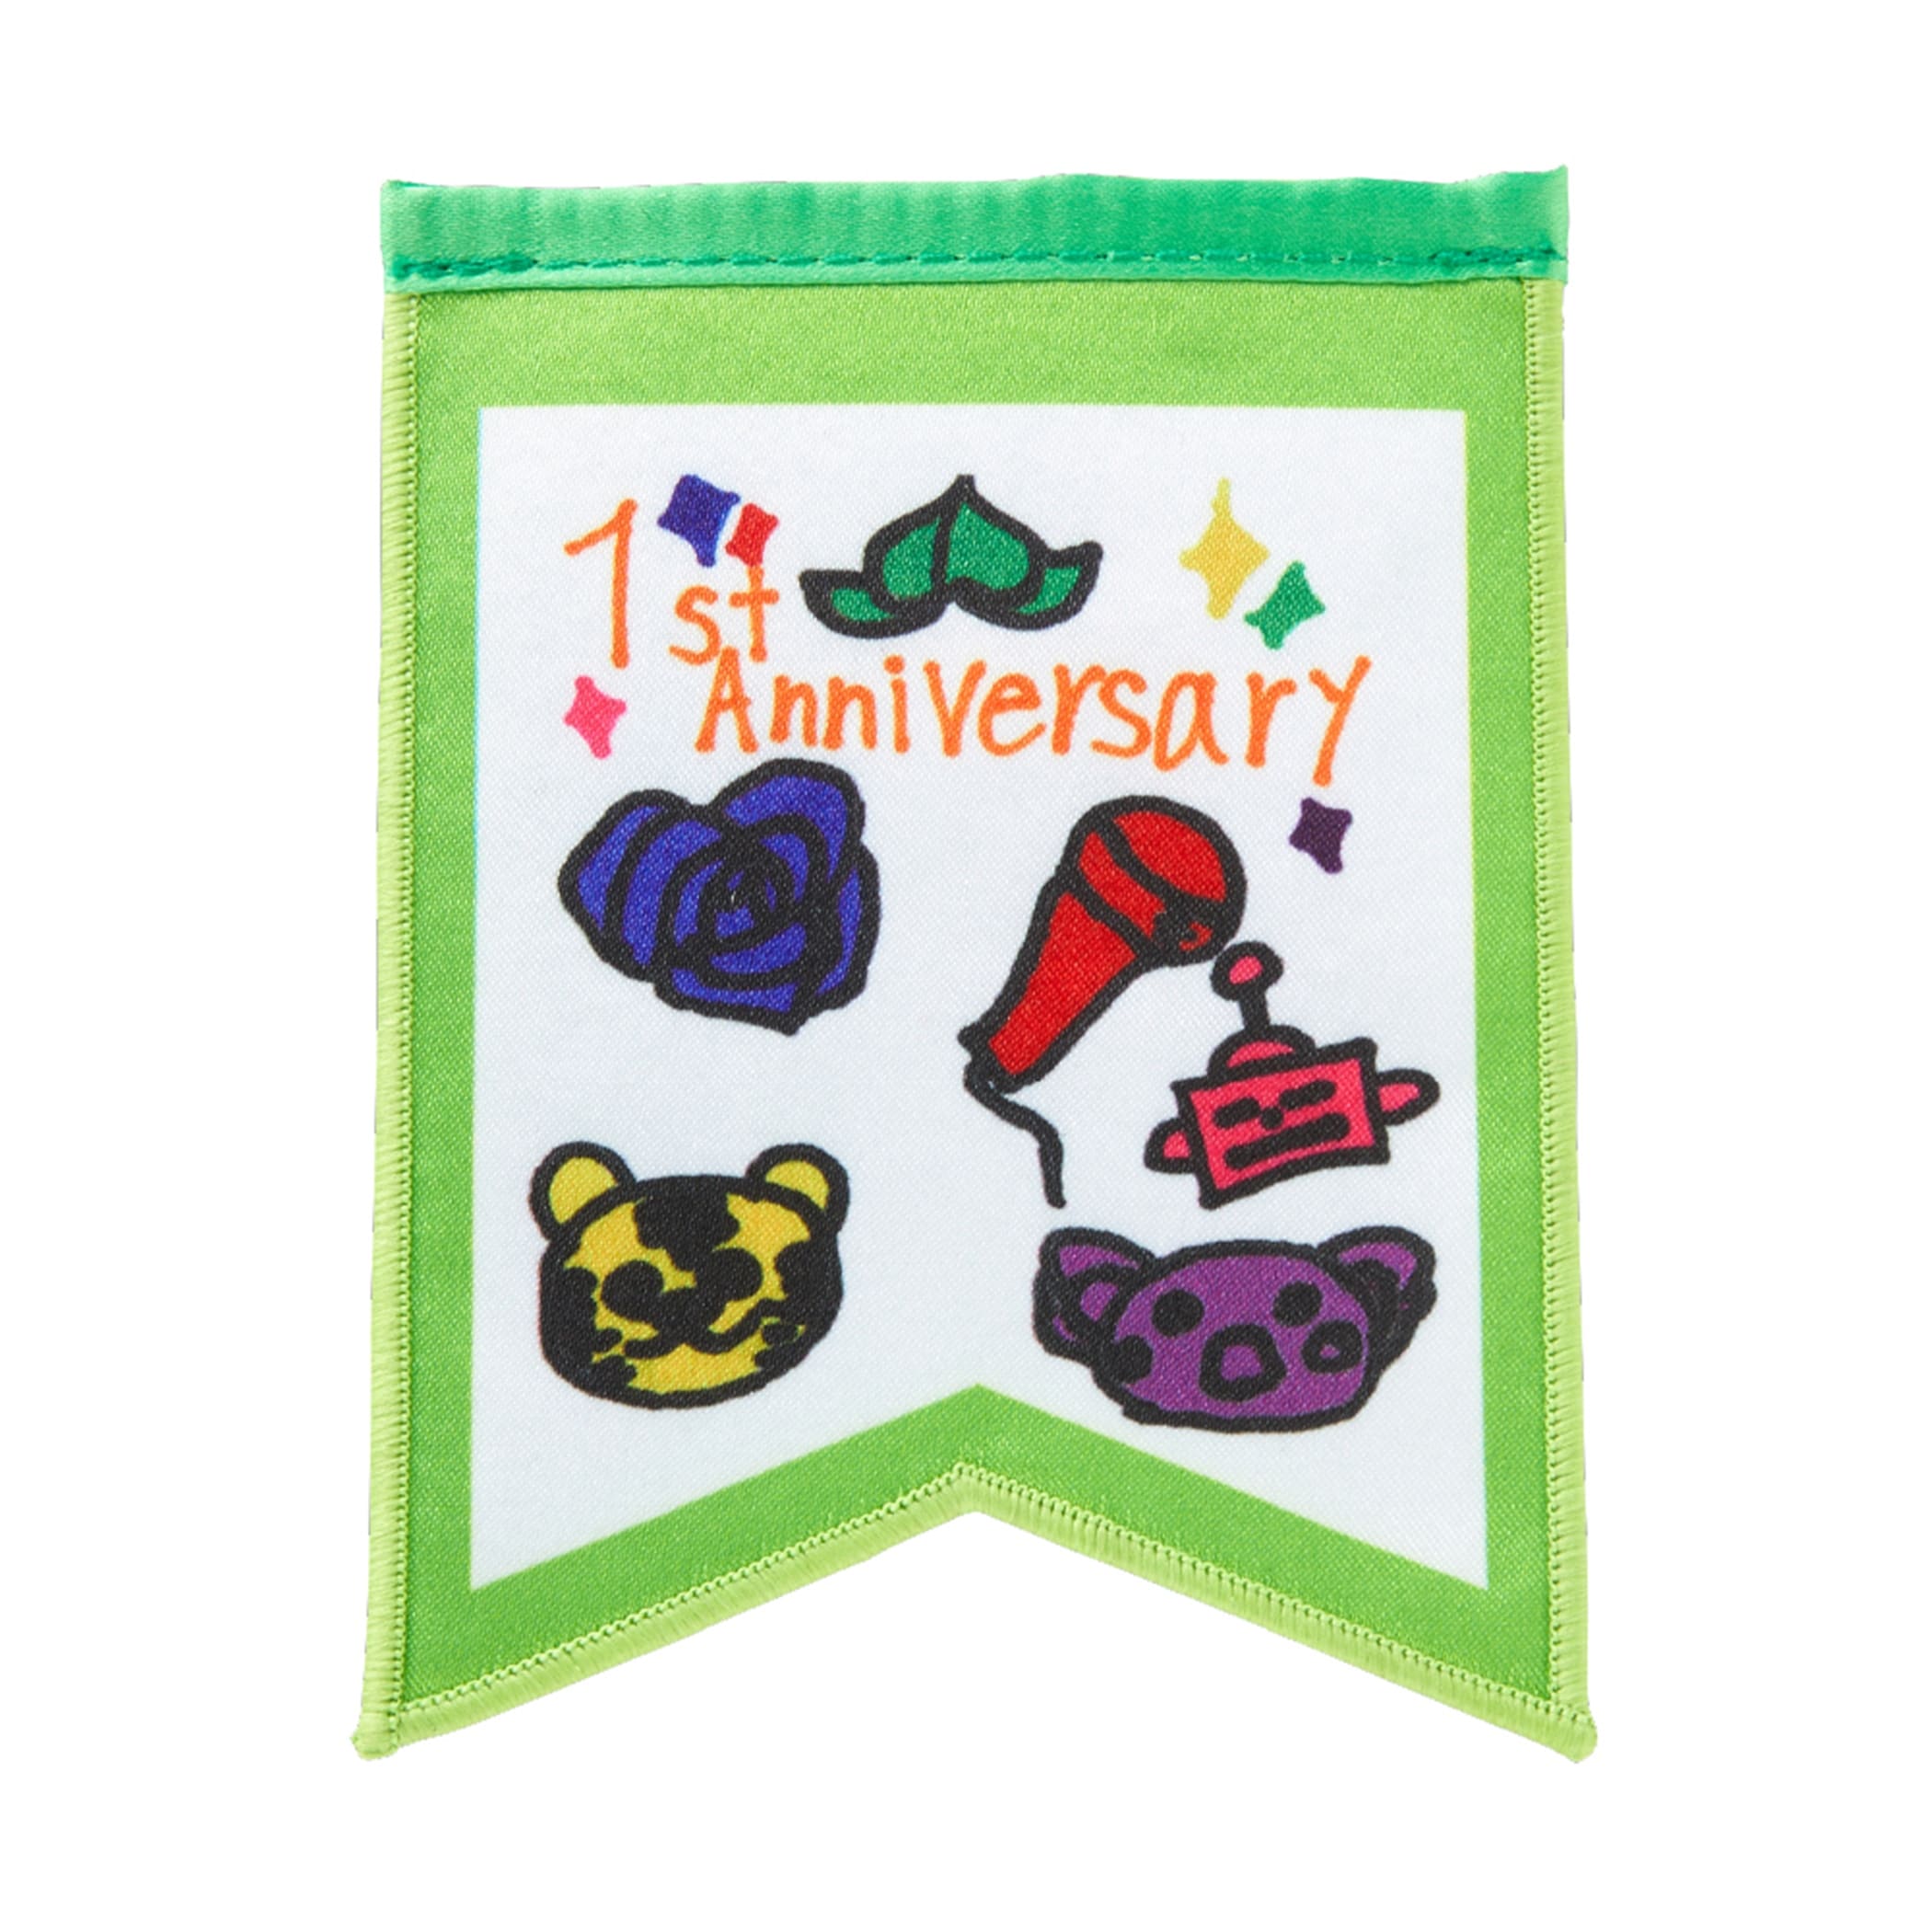 EXILE TRIBE STATION ONLINE STORE｜LIL LEAGUE 1st Anniversary 